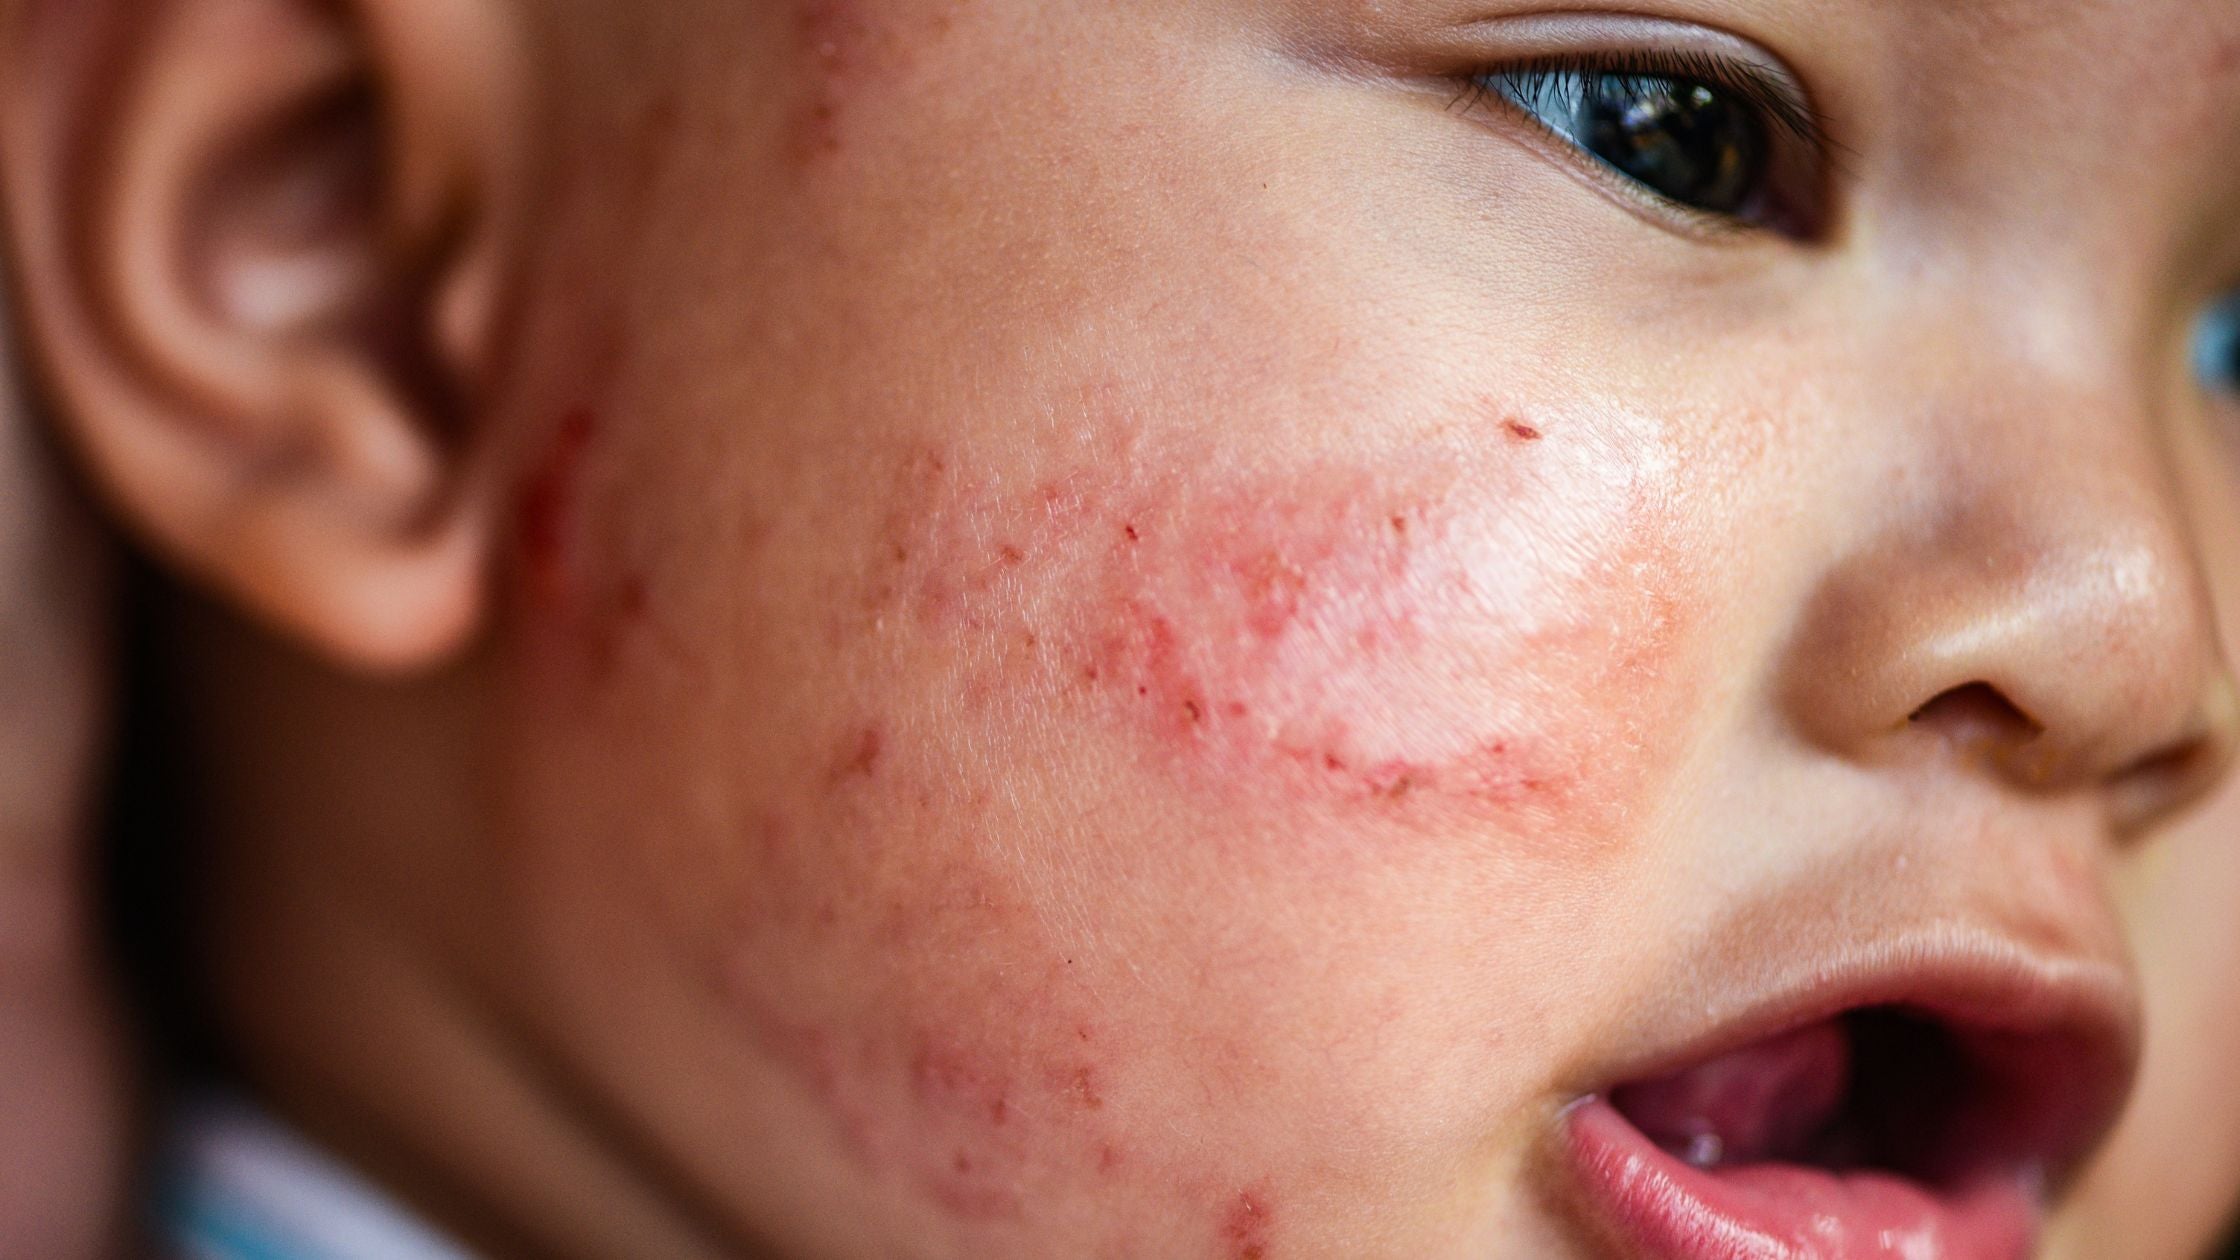 Is My Child's Eczema Infected?